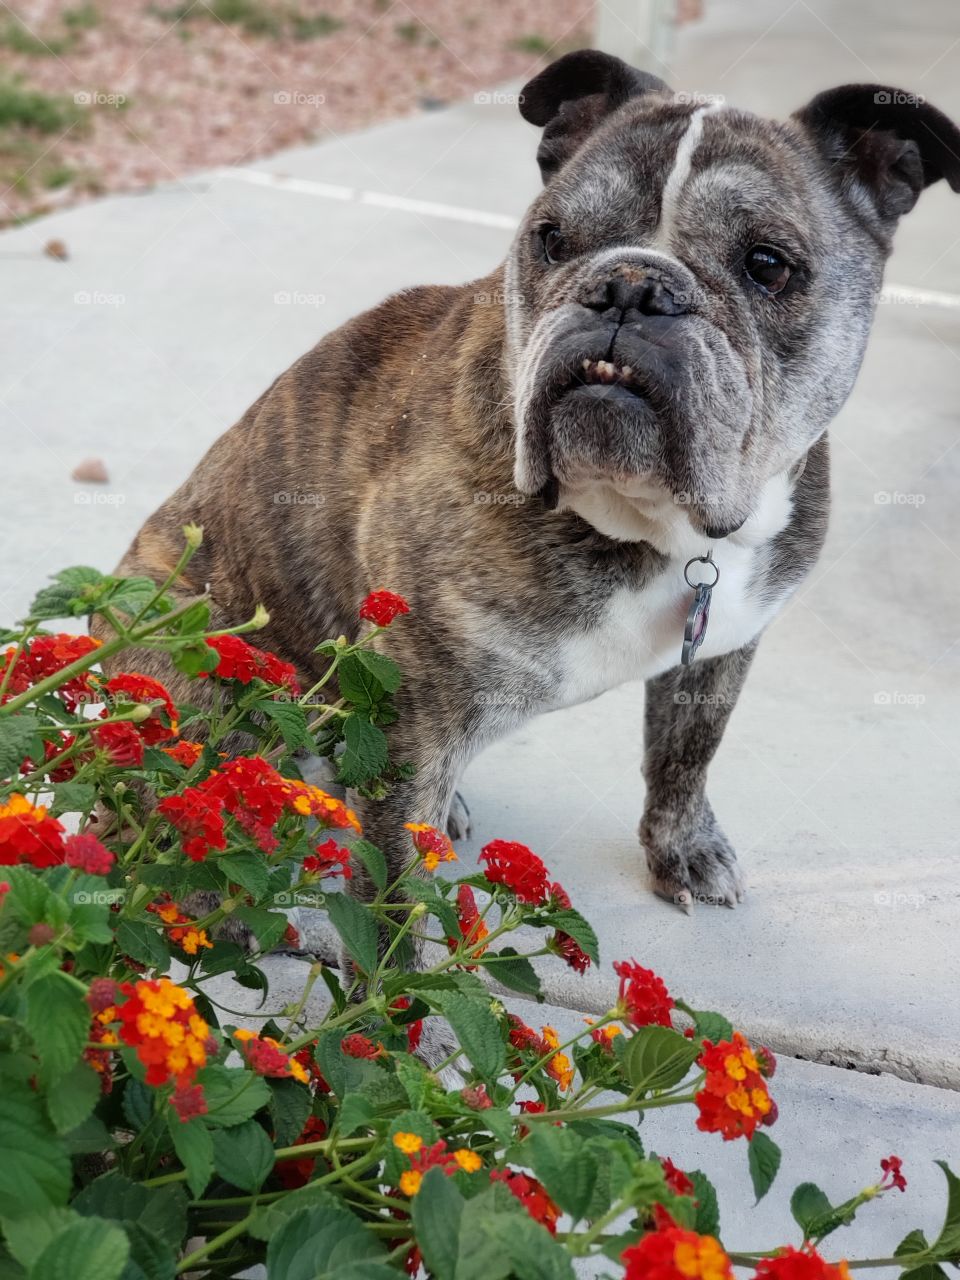 Stop to smell the flowers